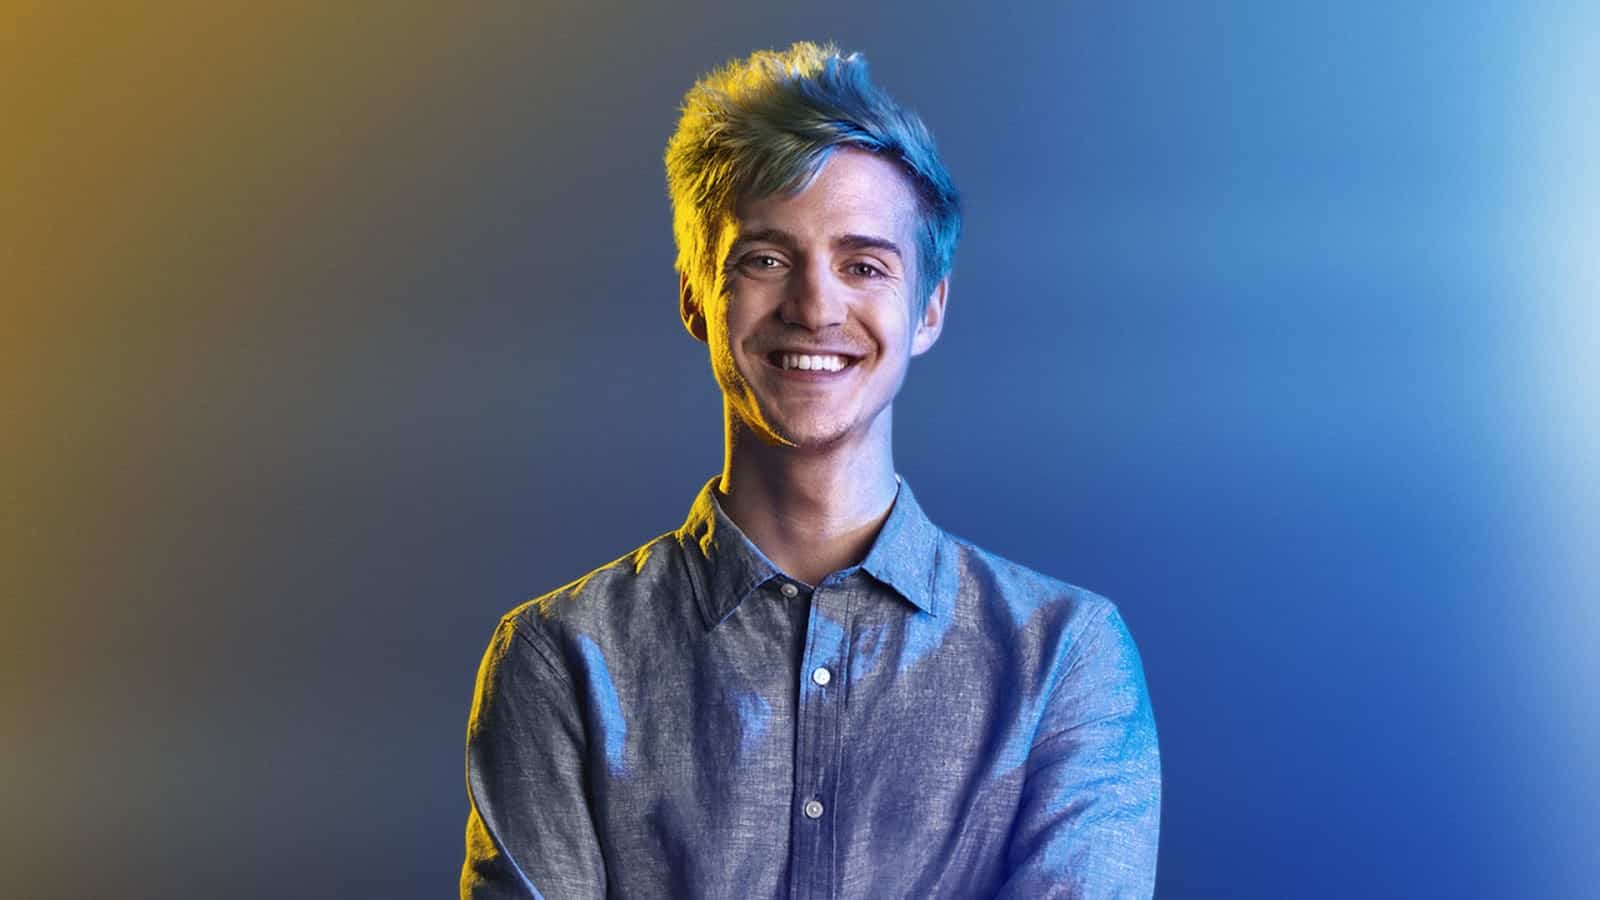 Fortnite: Ninja Returns To Twitch For The First Time In Over A Year